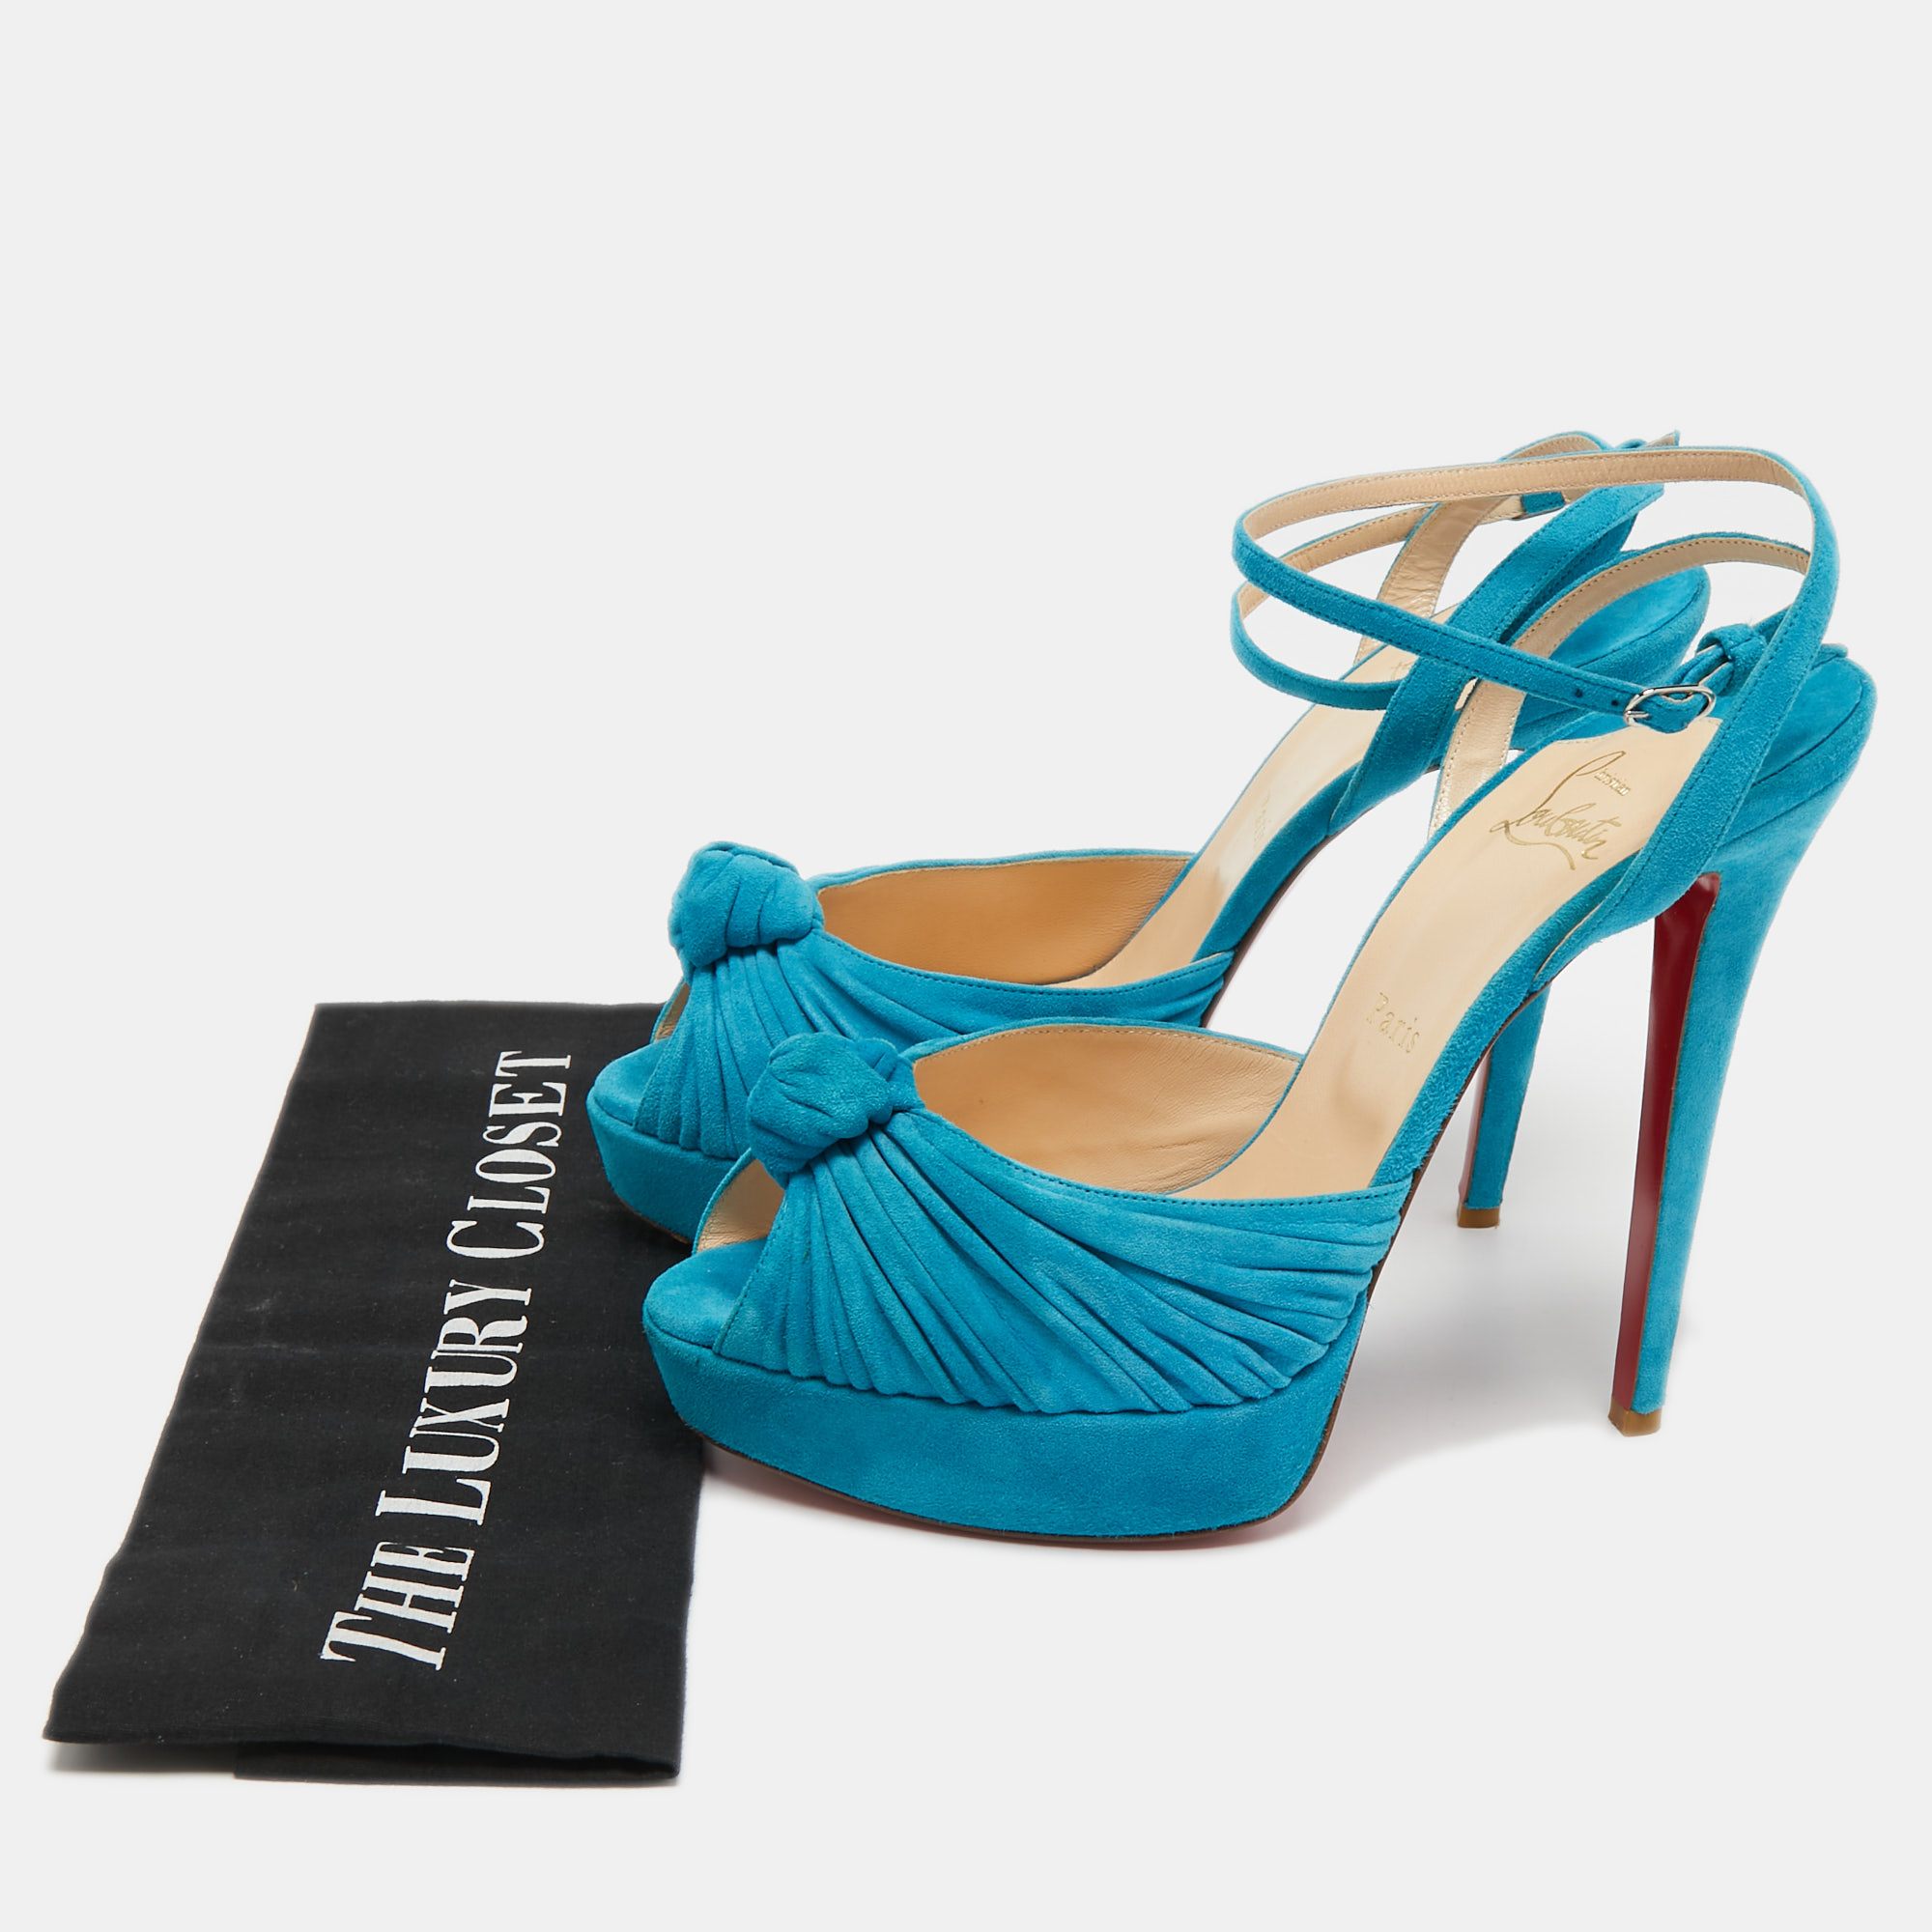 Christian Louboutin Blue Knotted Suede Greissimo Ankle Strap Sandals Size 40.5